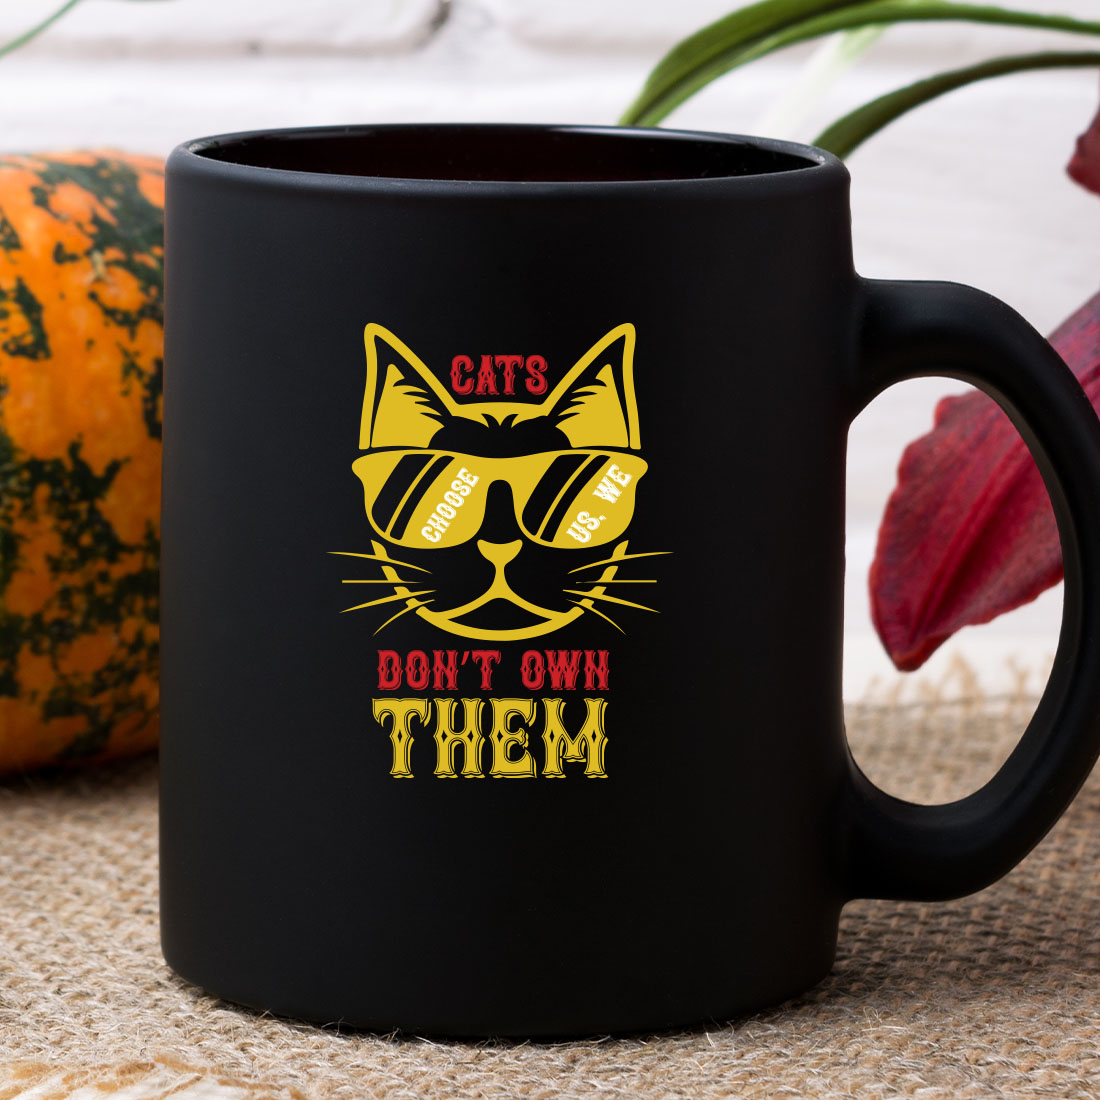 Black coffee mug with a cat's don't own them on it.